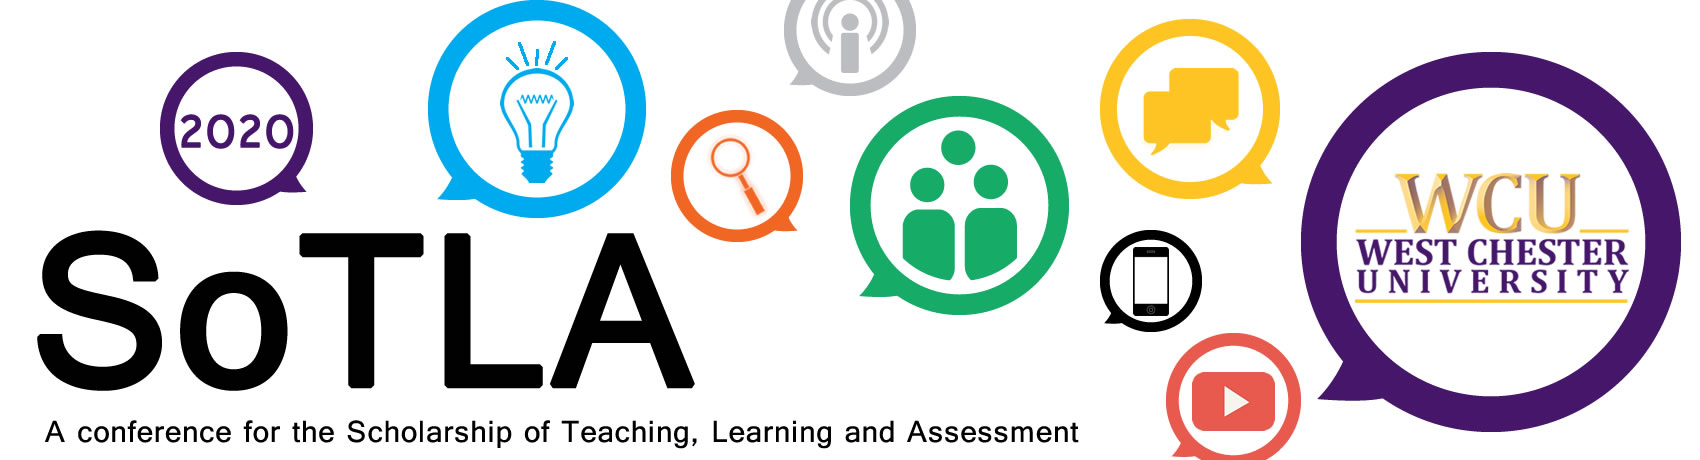 SoTLA, a conference for the scholarship of teaching, learning, and assessment